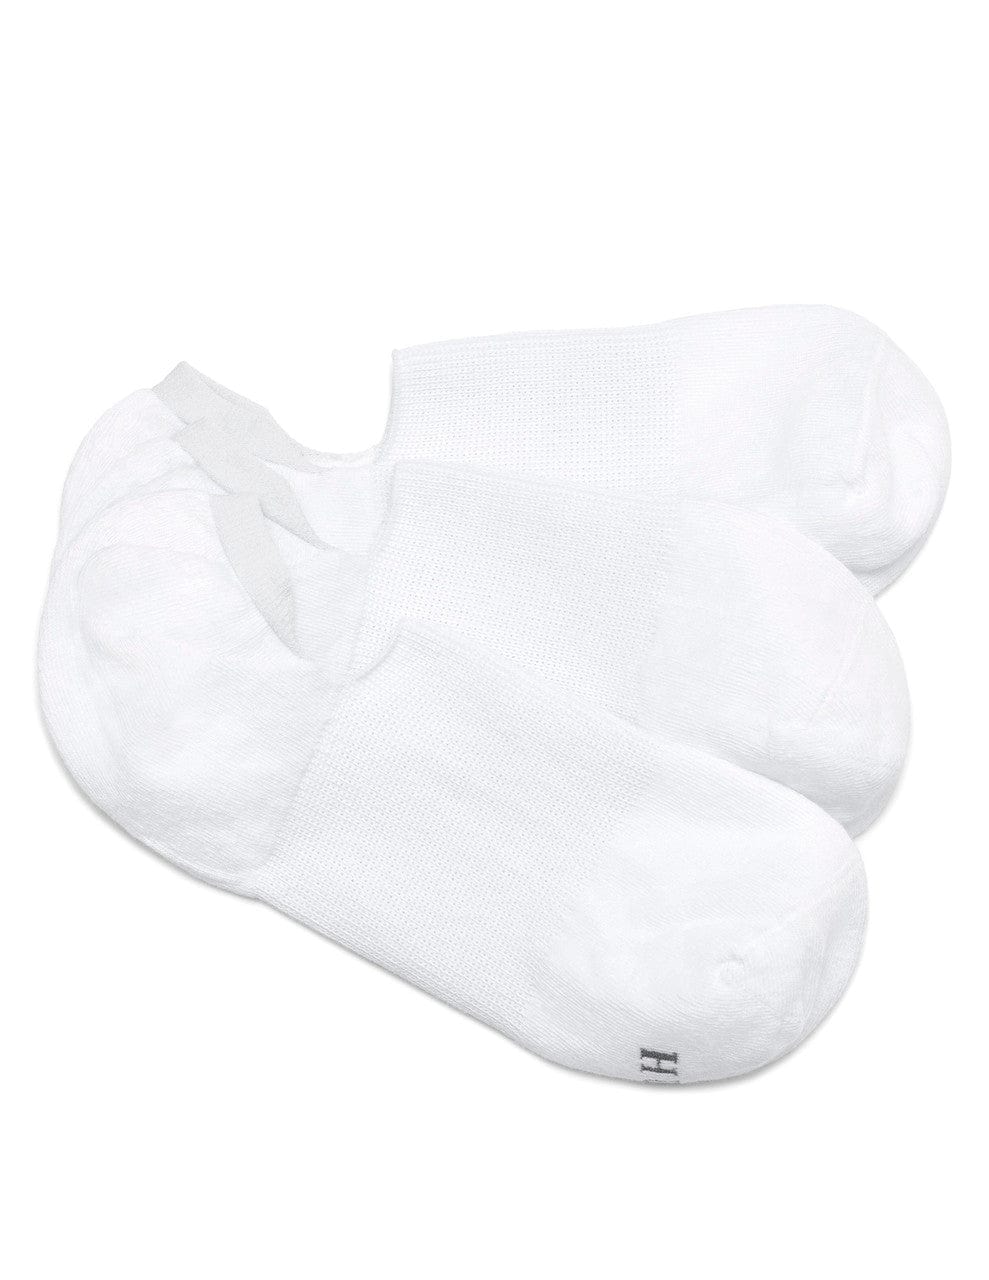 Cotton No Show Arch Hug Sock 3 Pair Pack